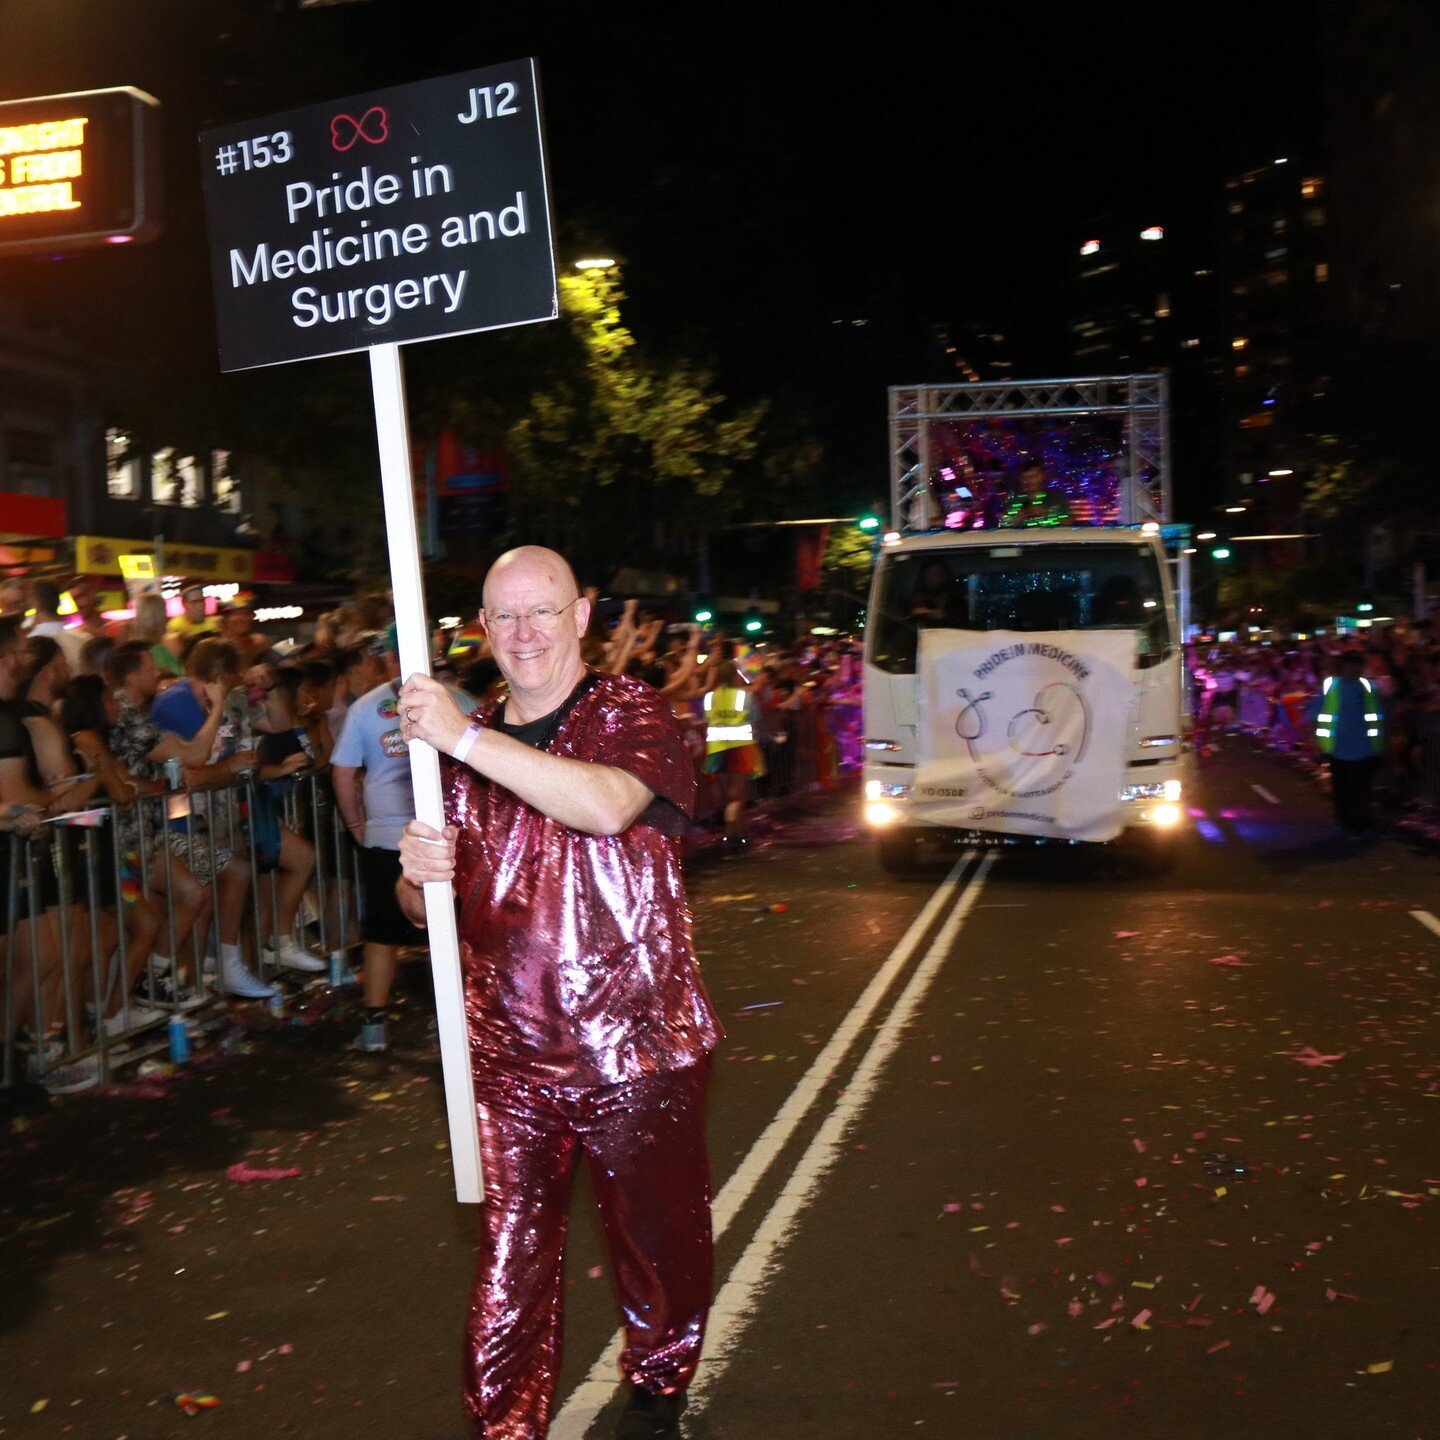 Saturday was a unique moment to celebrate the mammoth efforts of those who have fought for this level of LGBTQIA+SB/Takatāpui support and visibility in medicine.

This is just the beginning - with the passion and expertise of our members we hope to c